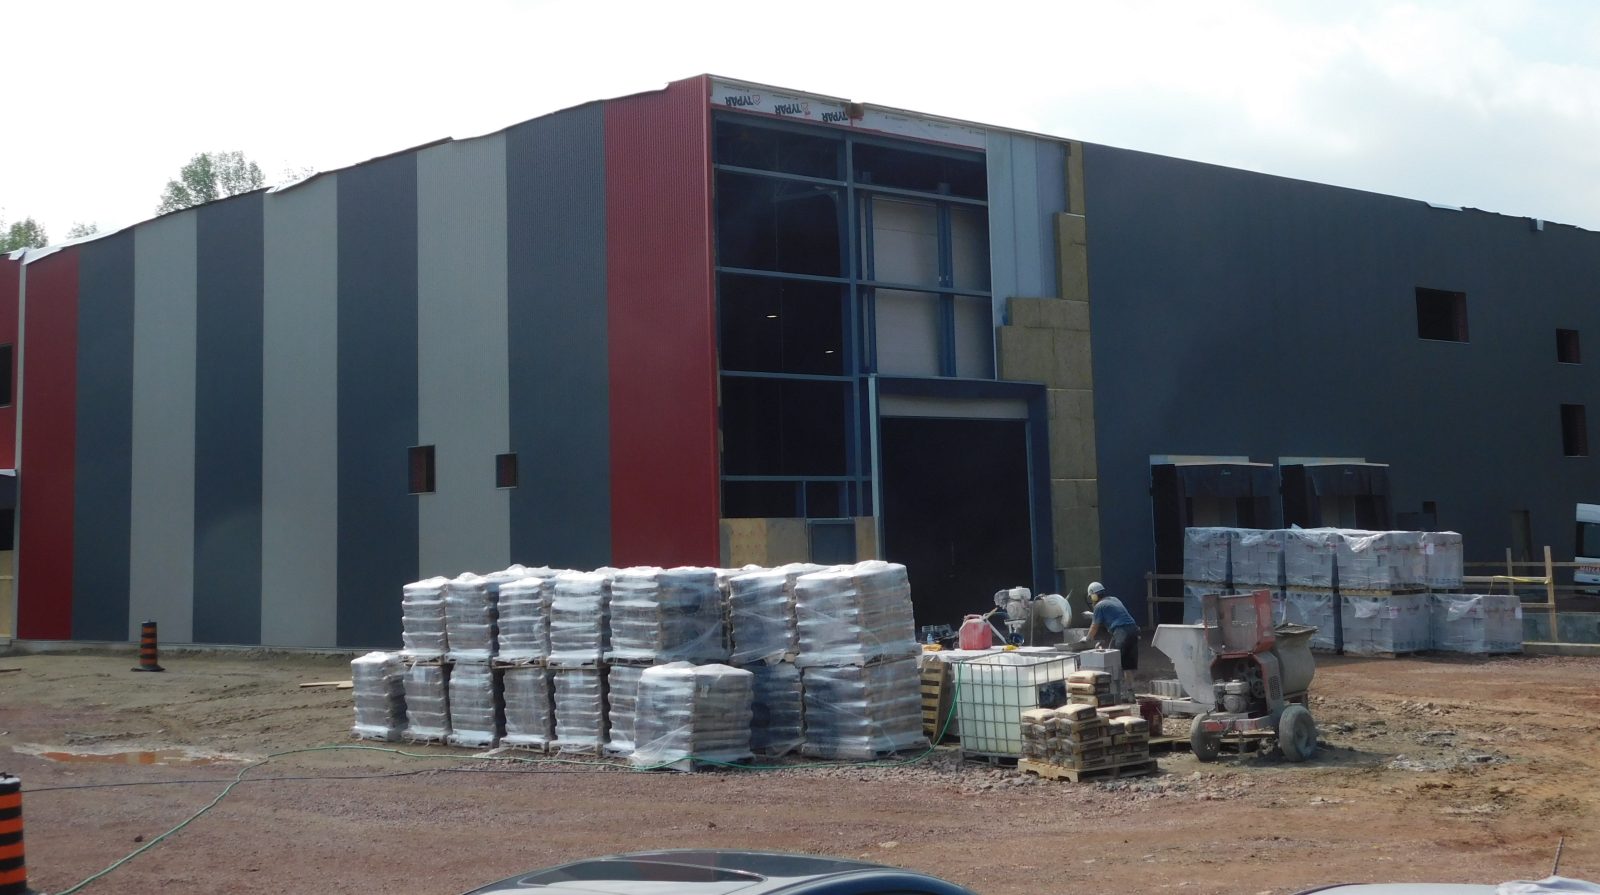 Ecolomondo recycling project is on track